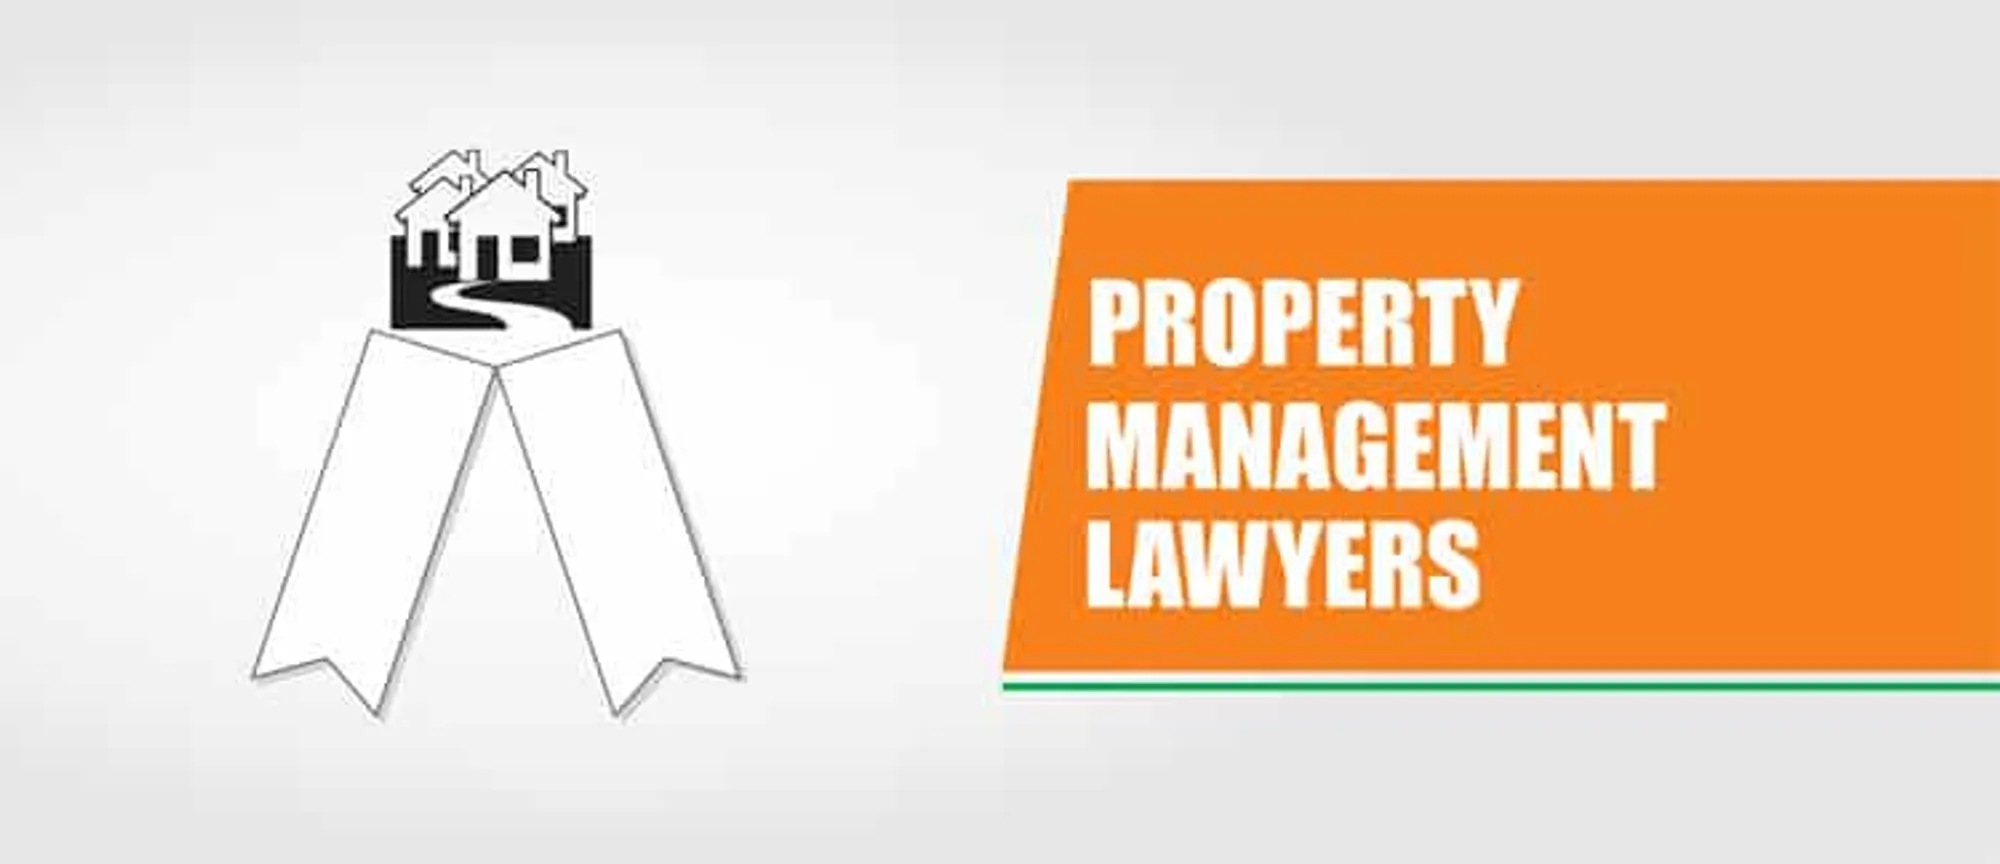 Property management lawyer in India